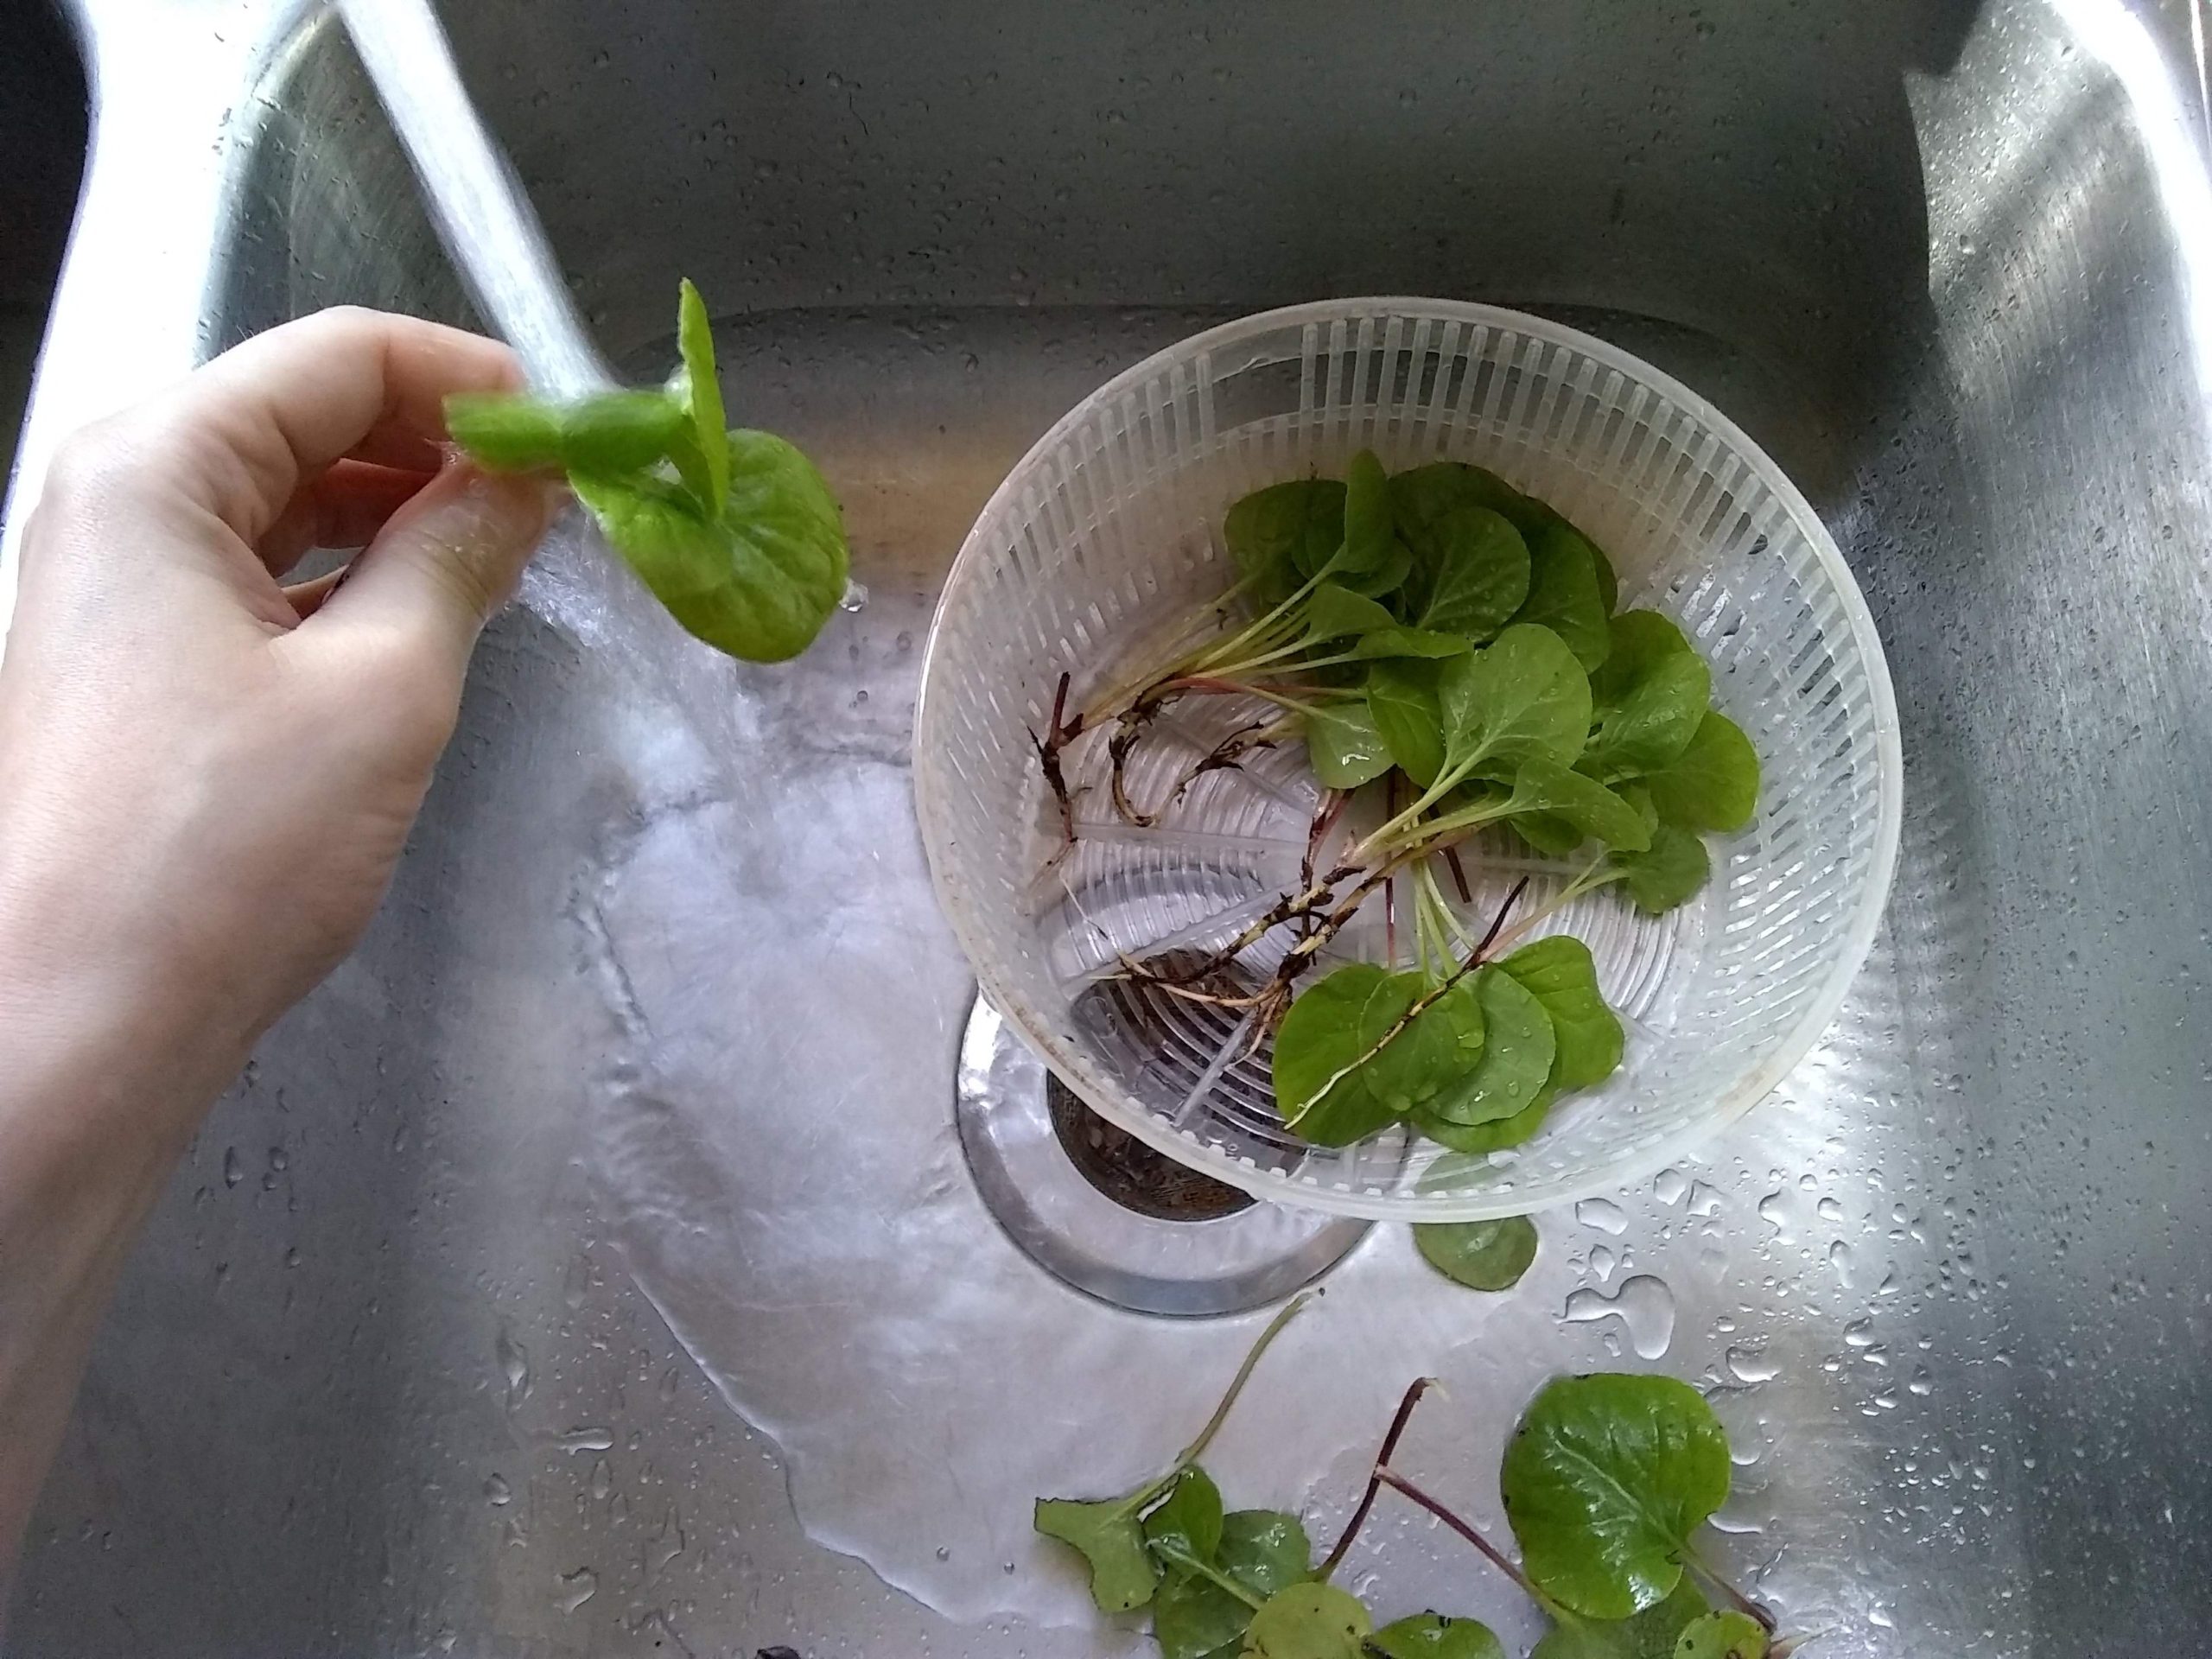 Washing Herbs in cold water